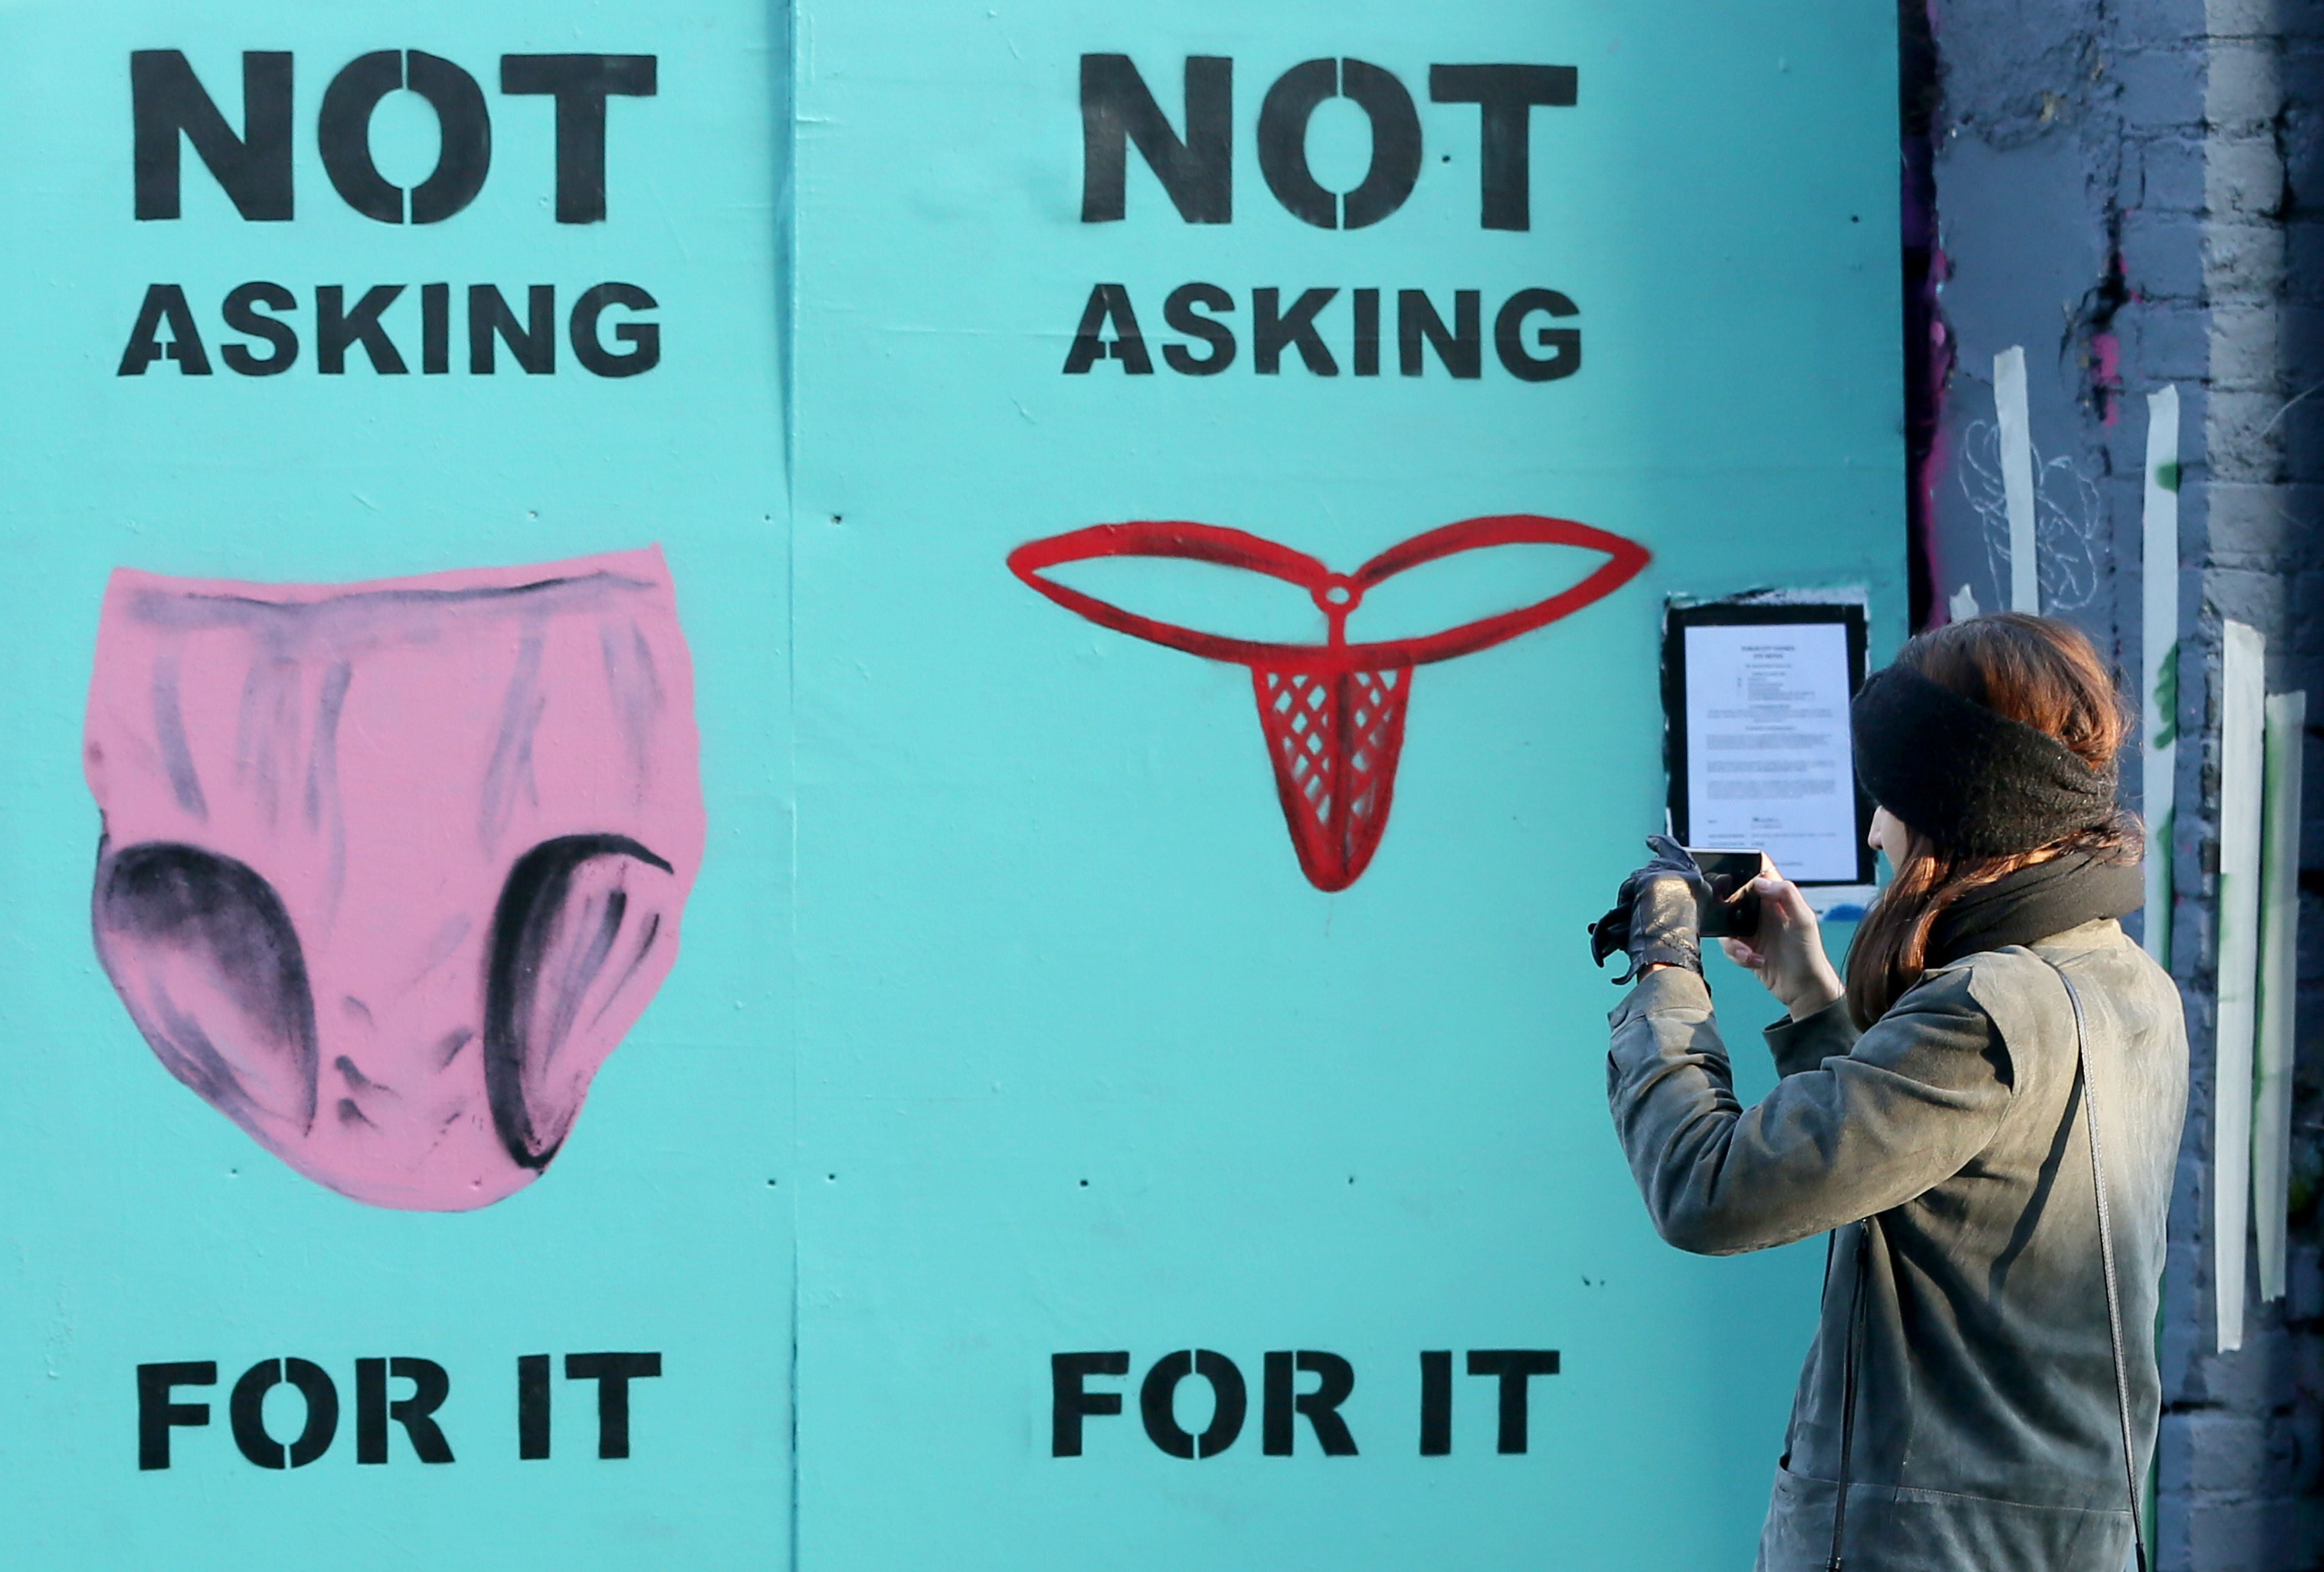 Mural in Dublin after lawyer showed a 17-year-old girl’s thong in court as supposed evidence of her consent in a rape case